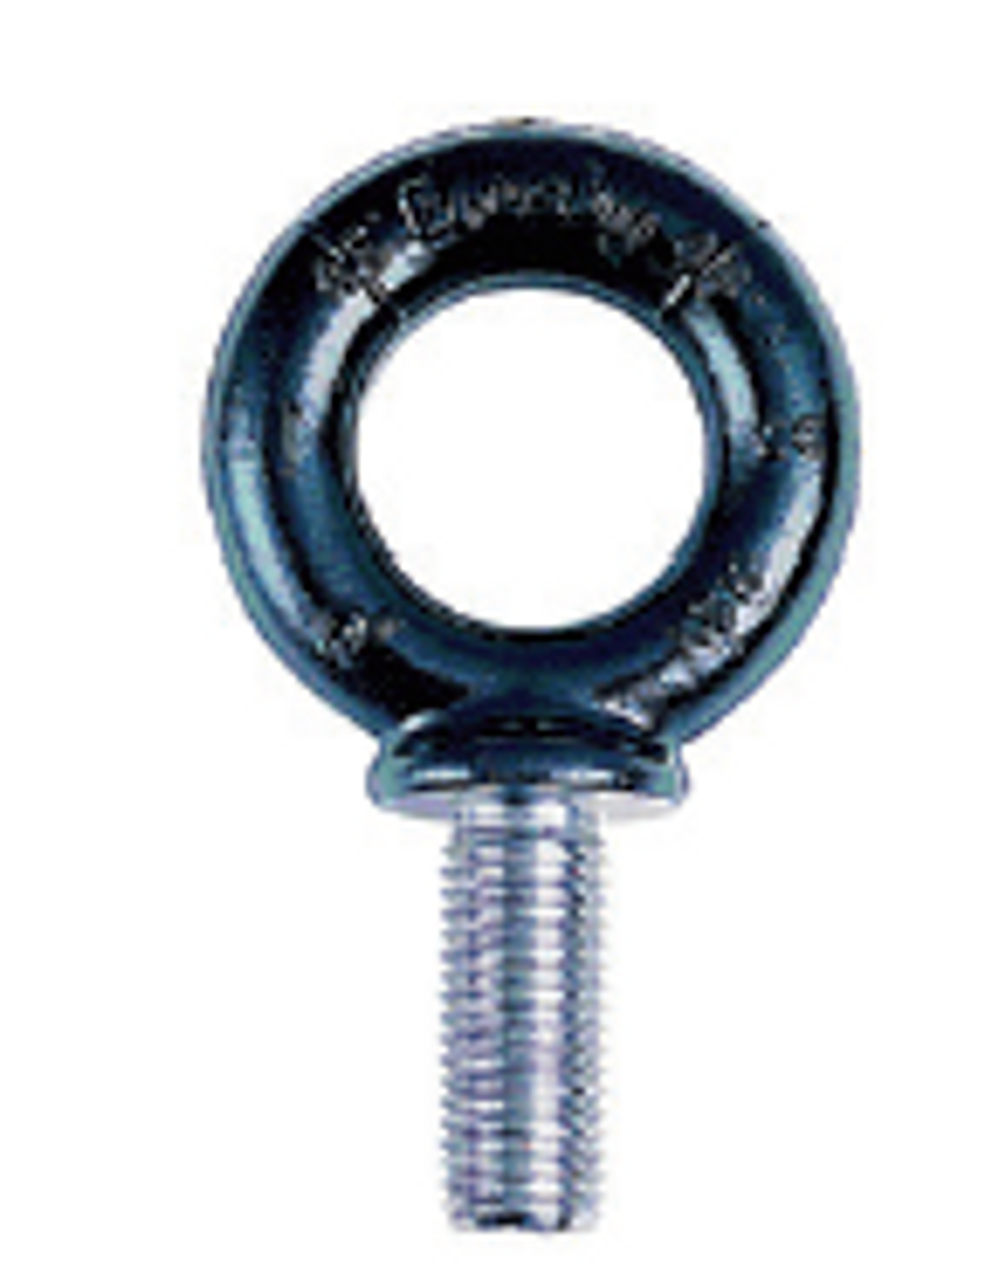 S-279 UNC Shoulder Type Machinery Eye Bolts